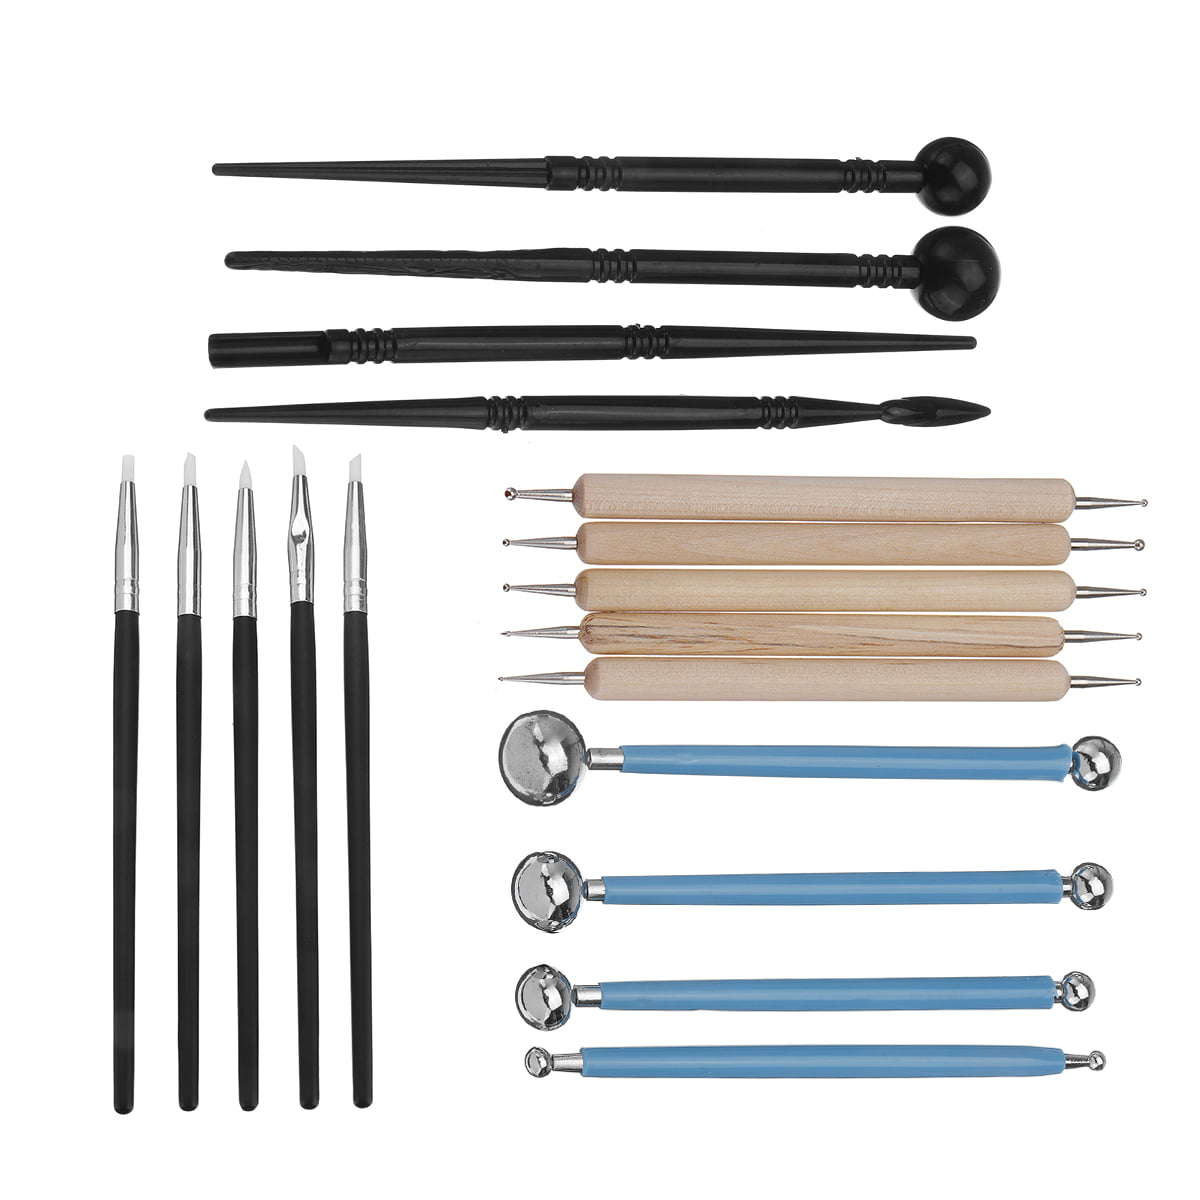 Polymer Art Clay Tools Projects Set 10PC Modelling Sculpting Tool Pottery Models 